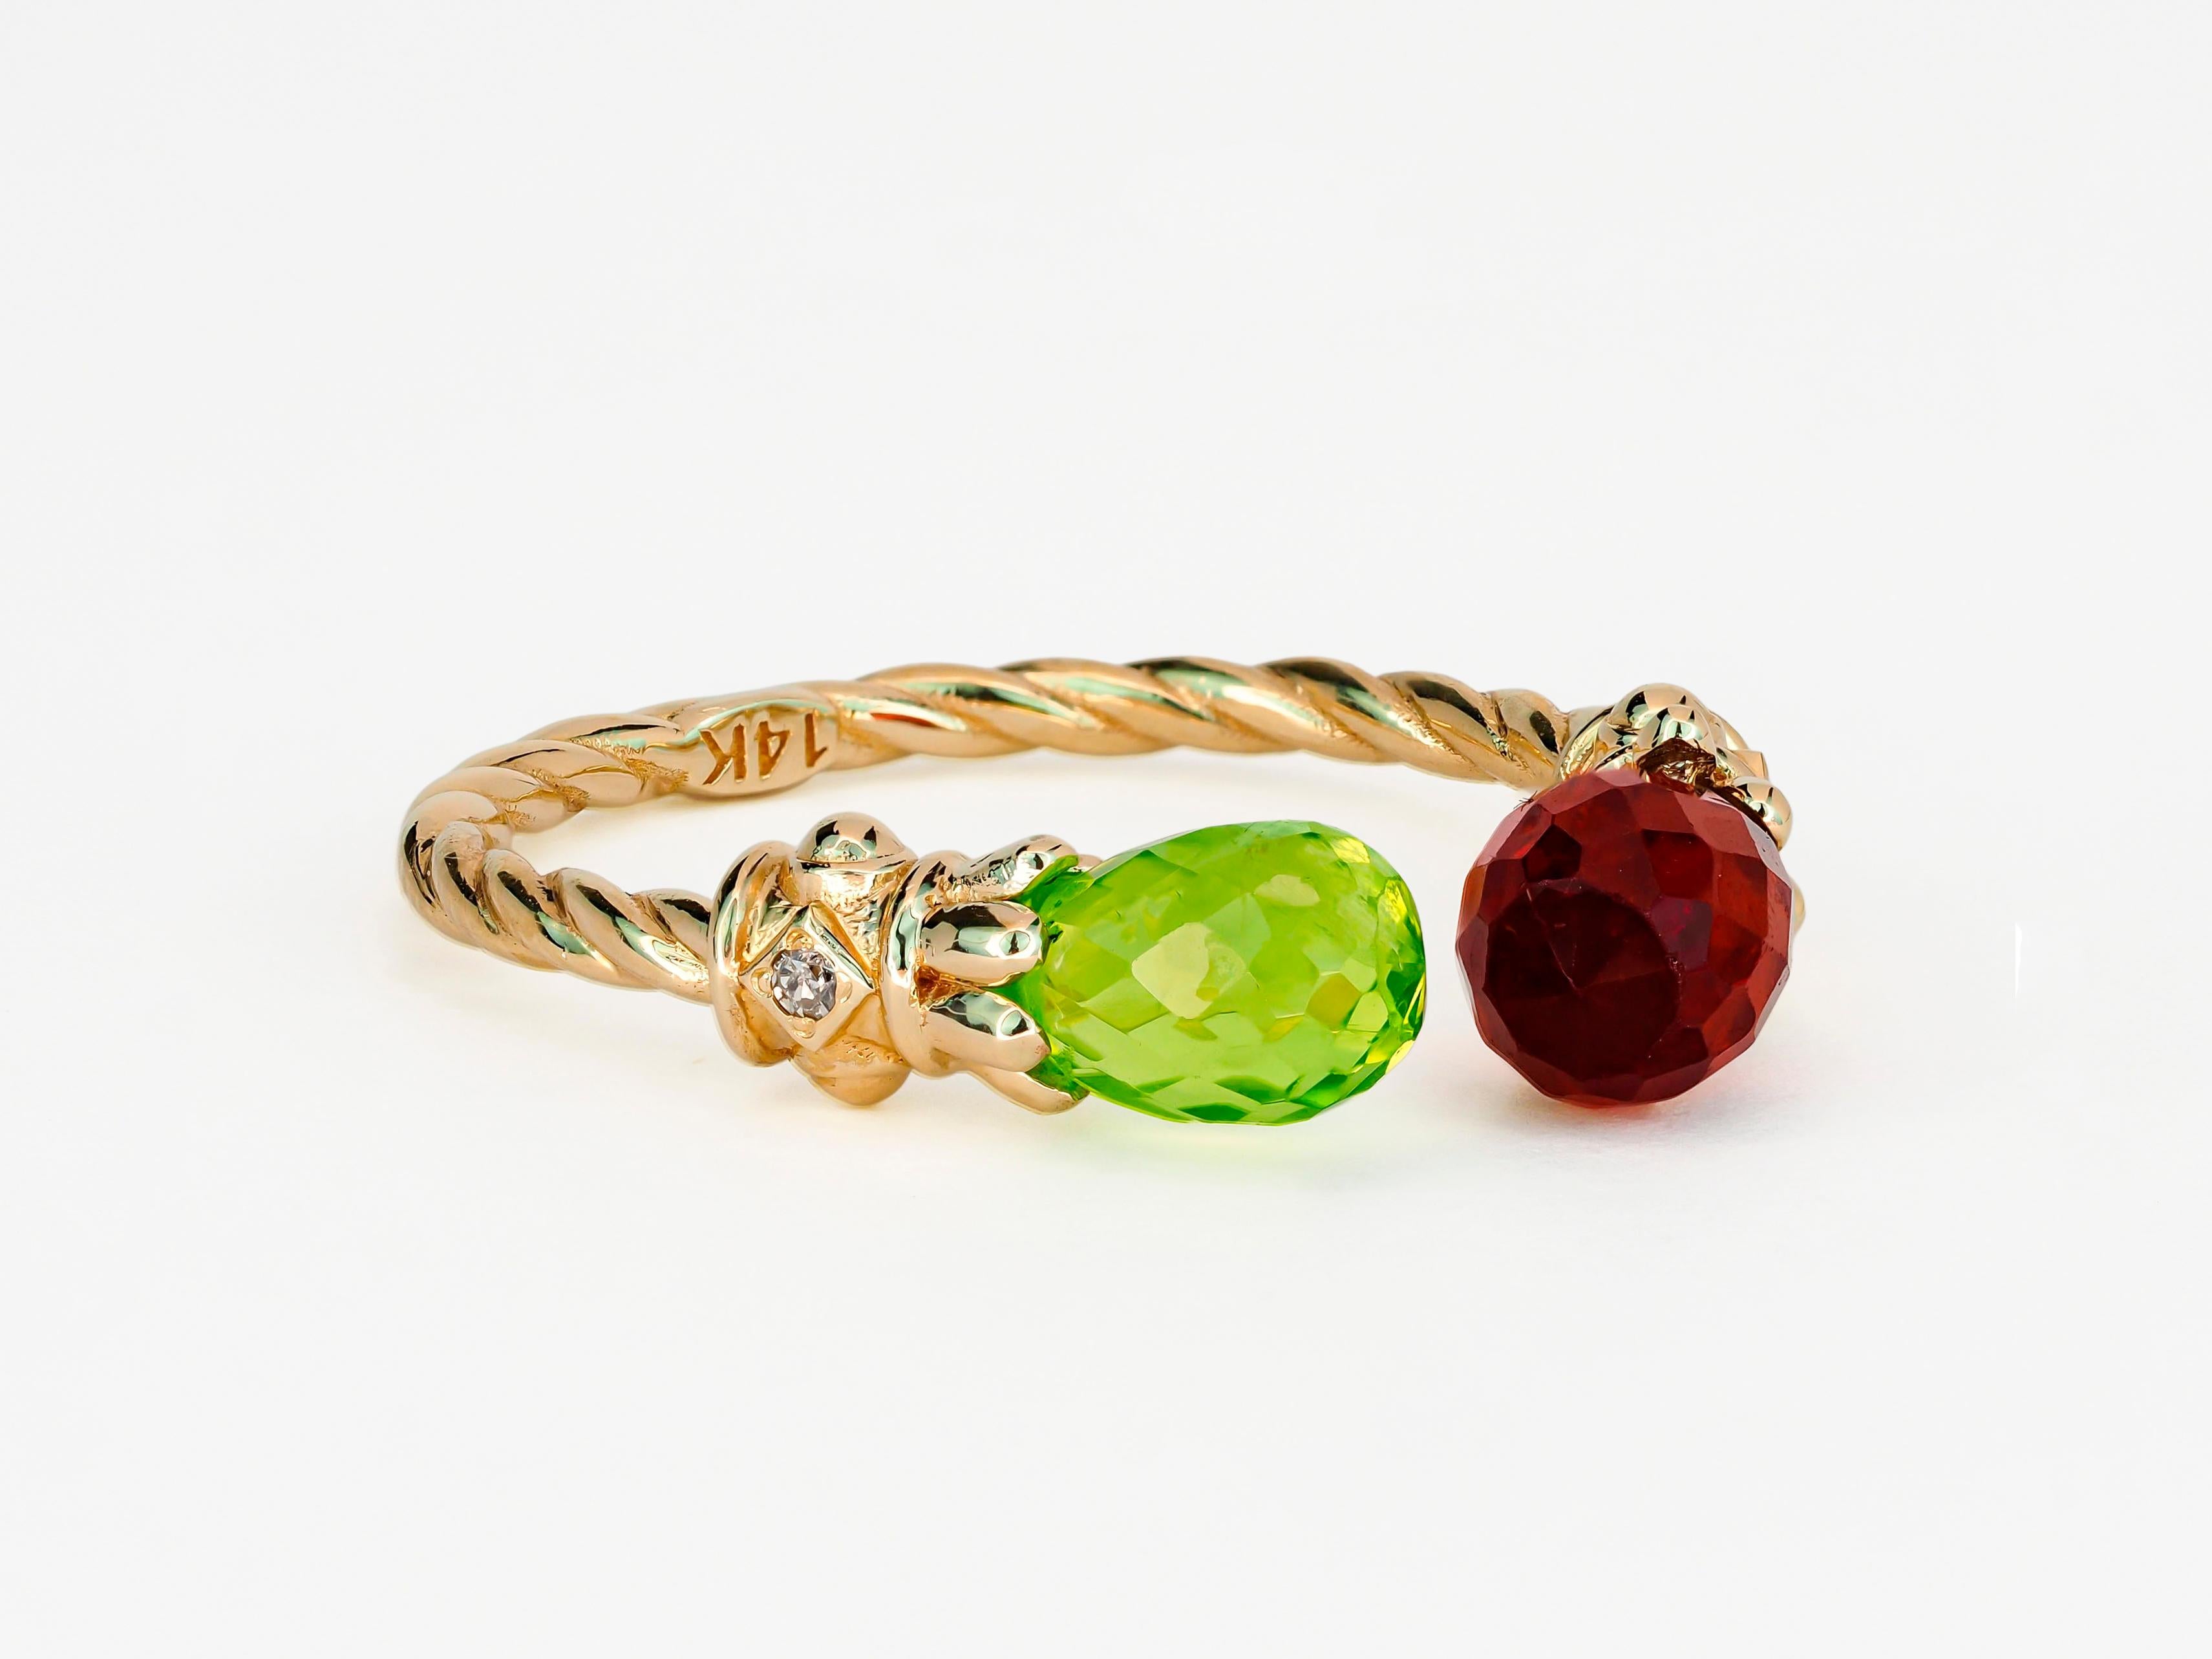 For Sale:   Open ended gold ring with peridot, garnet and diamonds 14